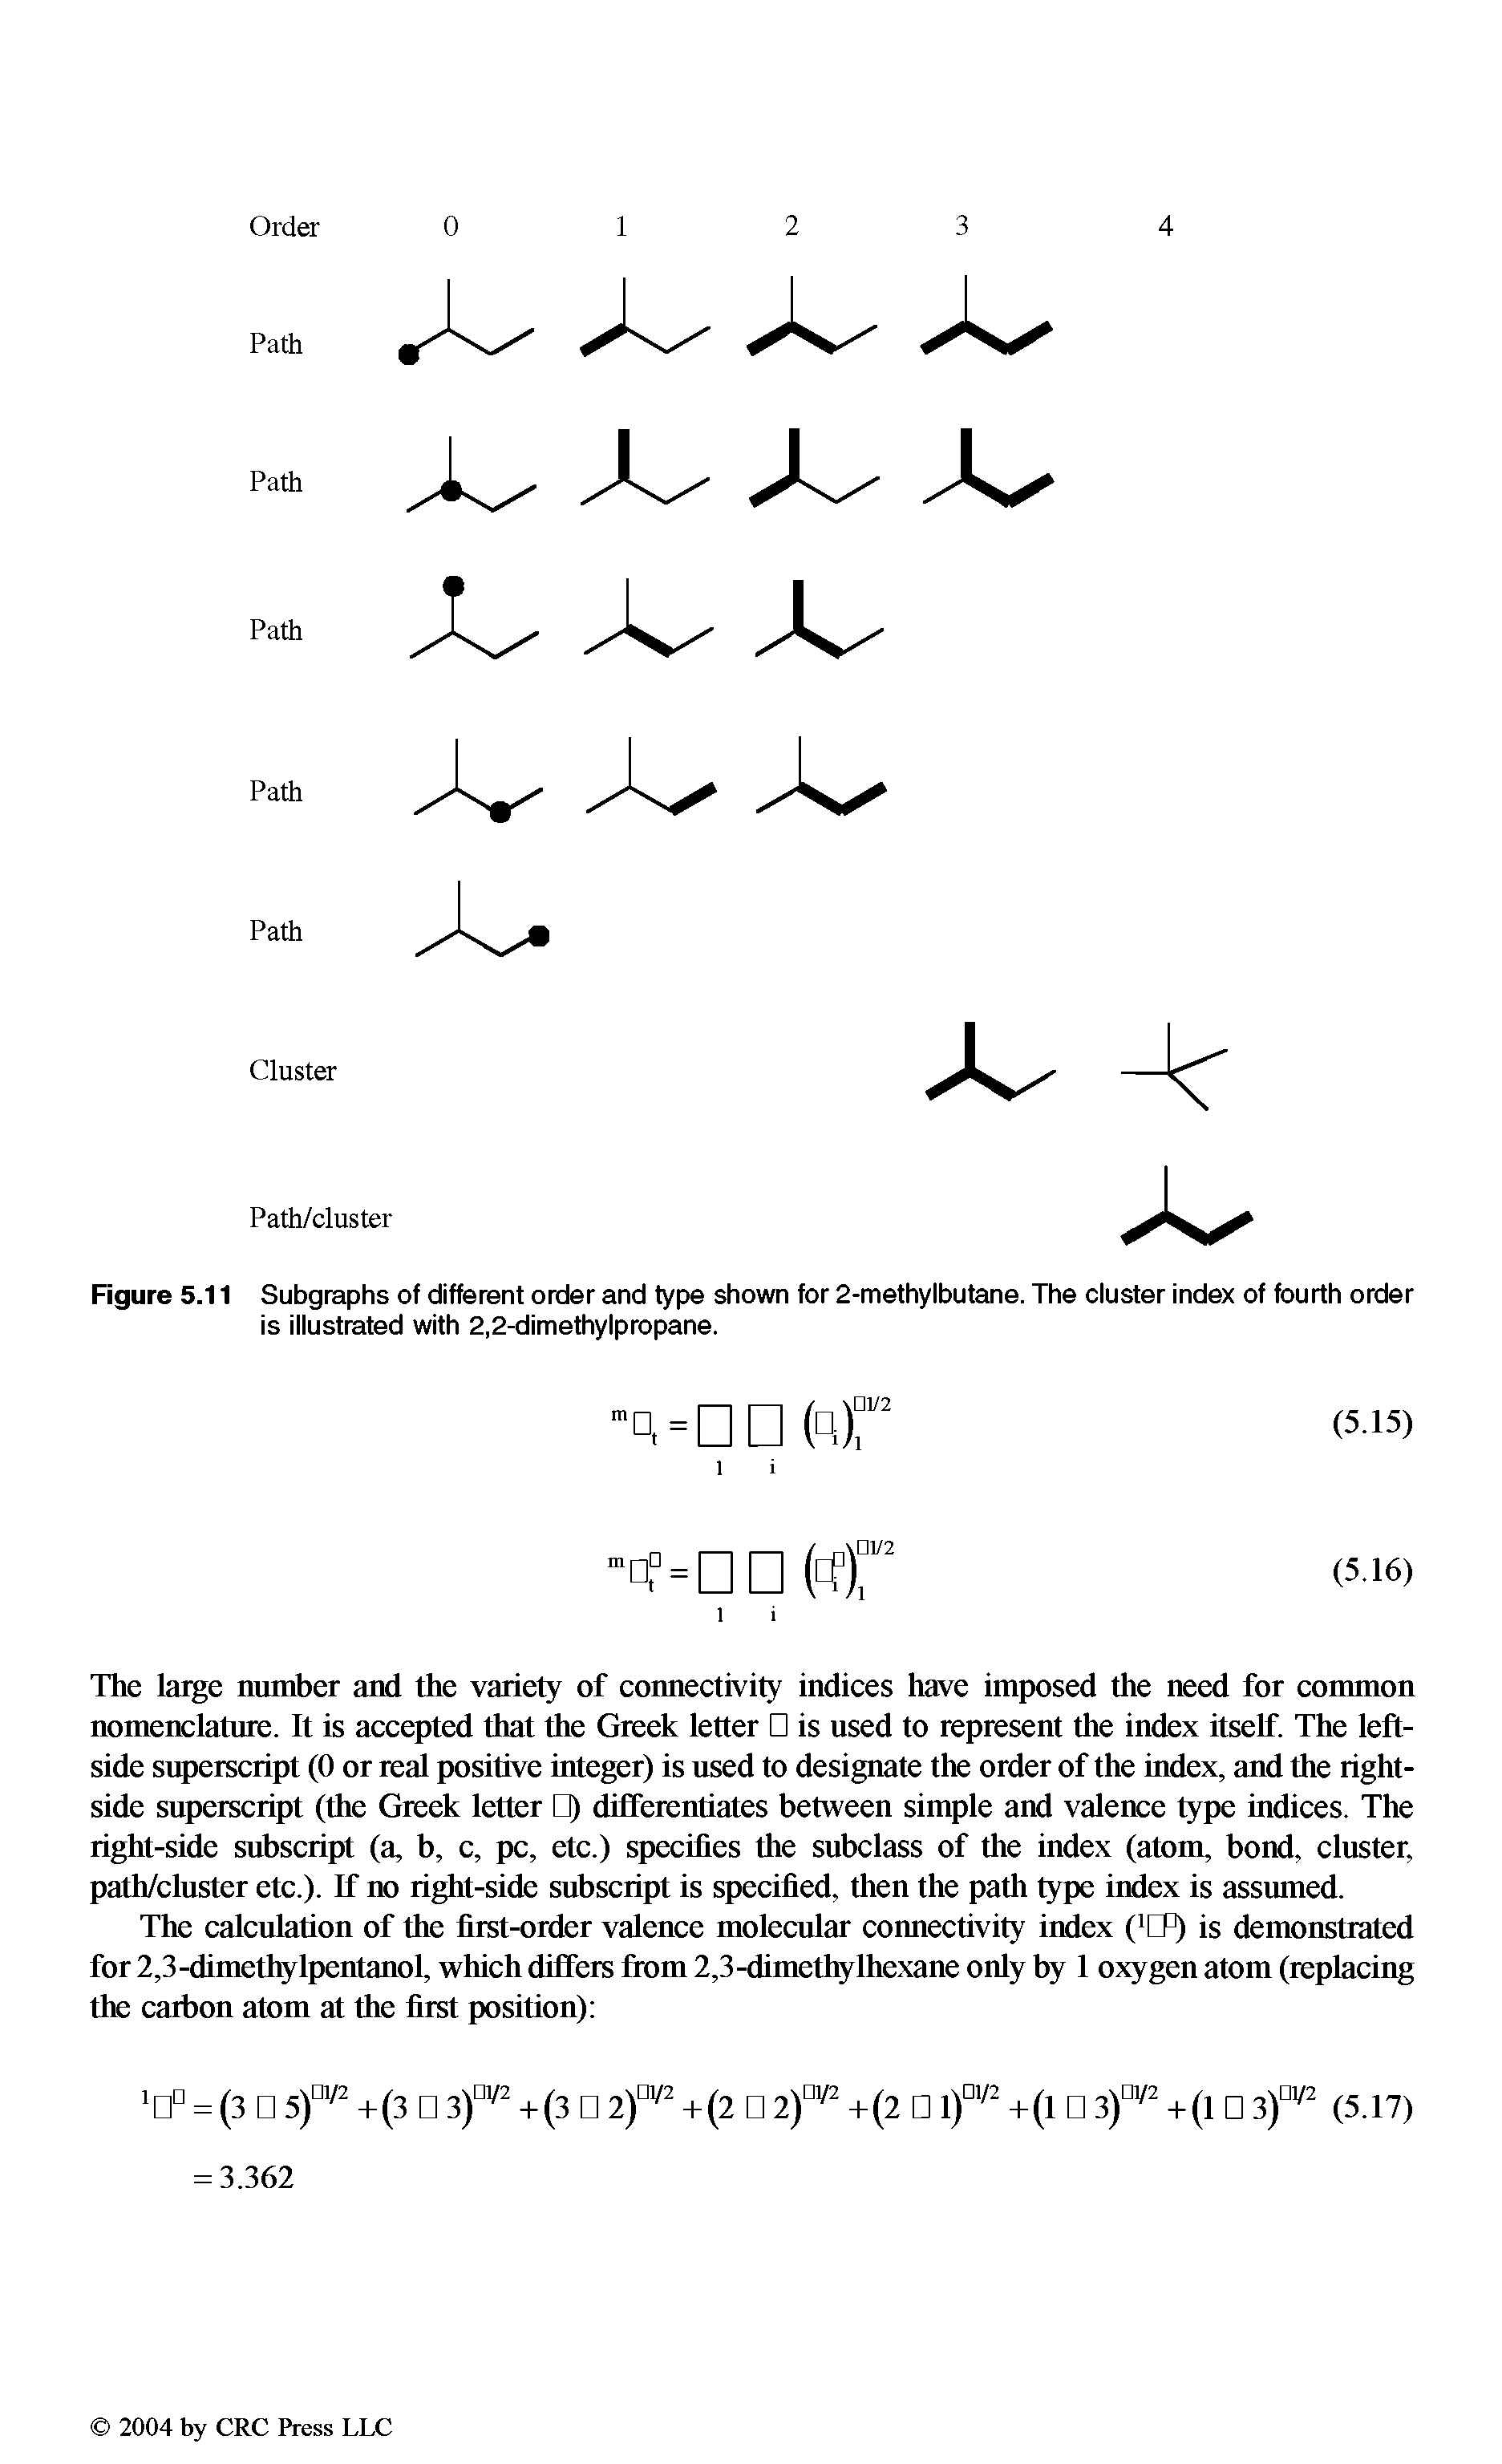 Figure 5.11 Subgraphs of different order and type shown for 2-methylbutane. The cluster index of fourth order is illustrated with 2,2-dimethylpropane.